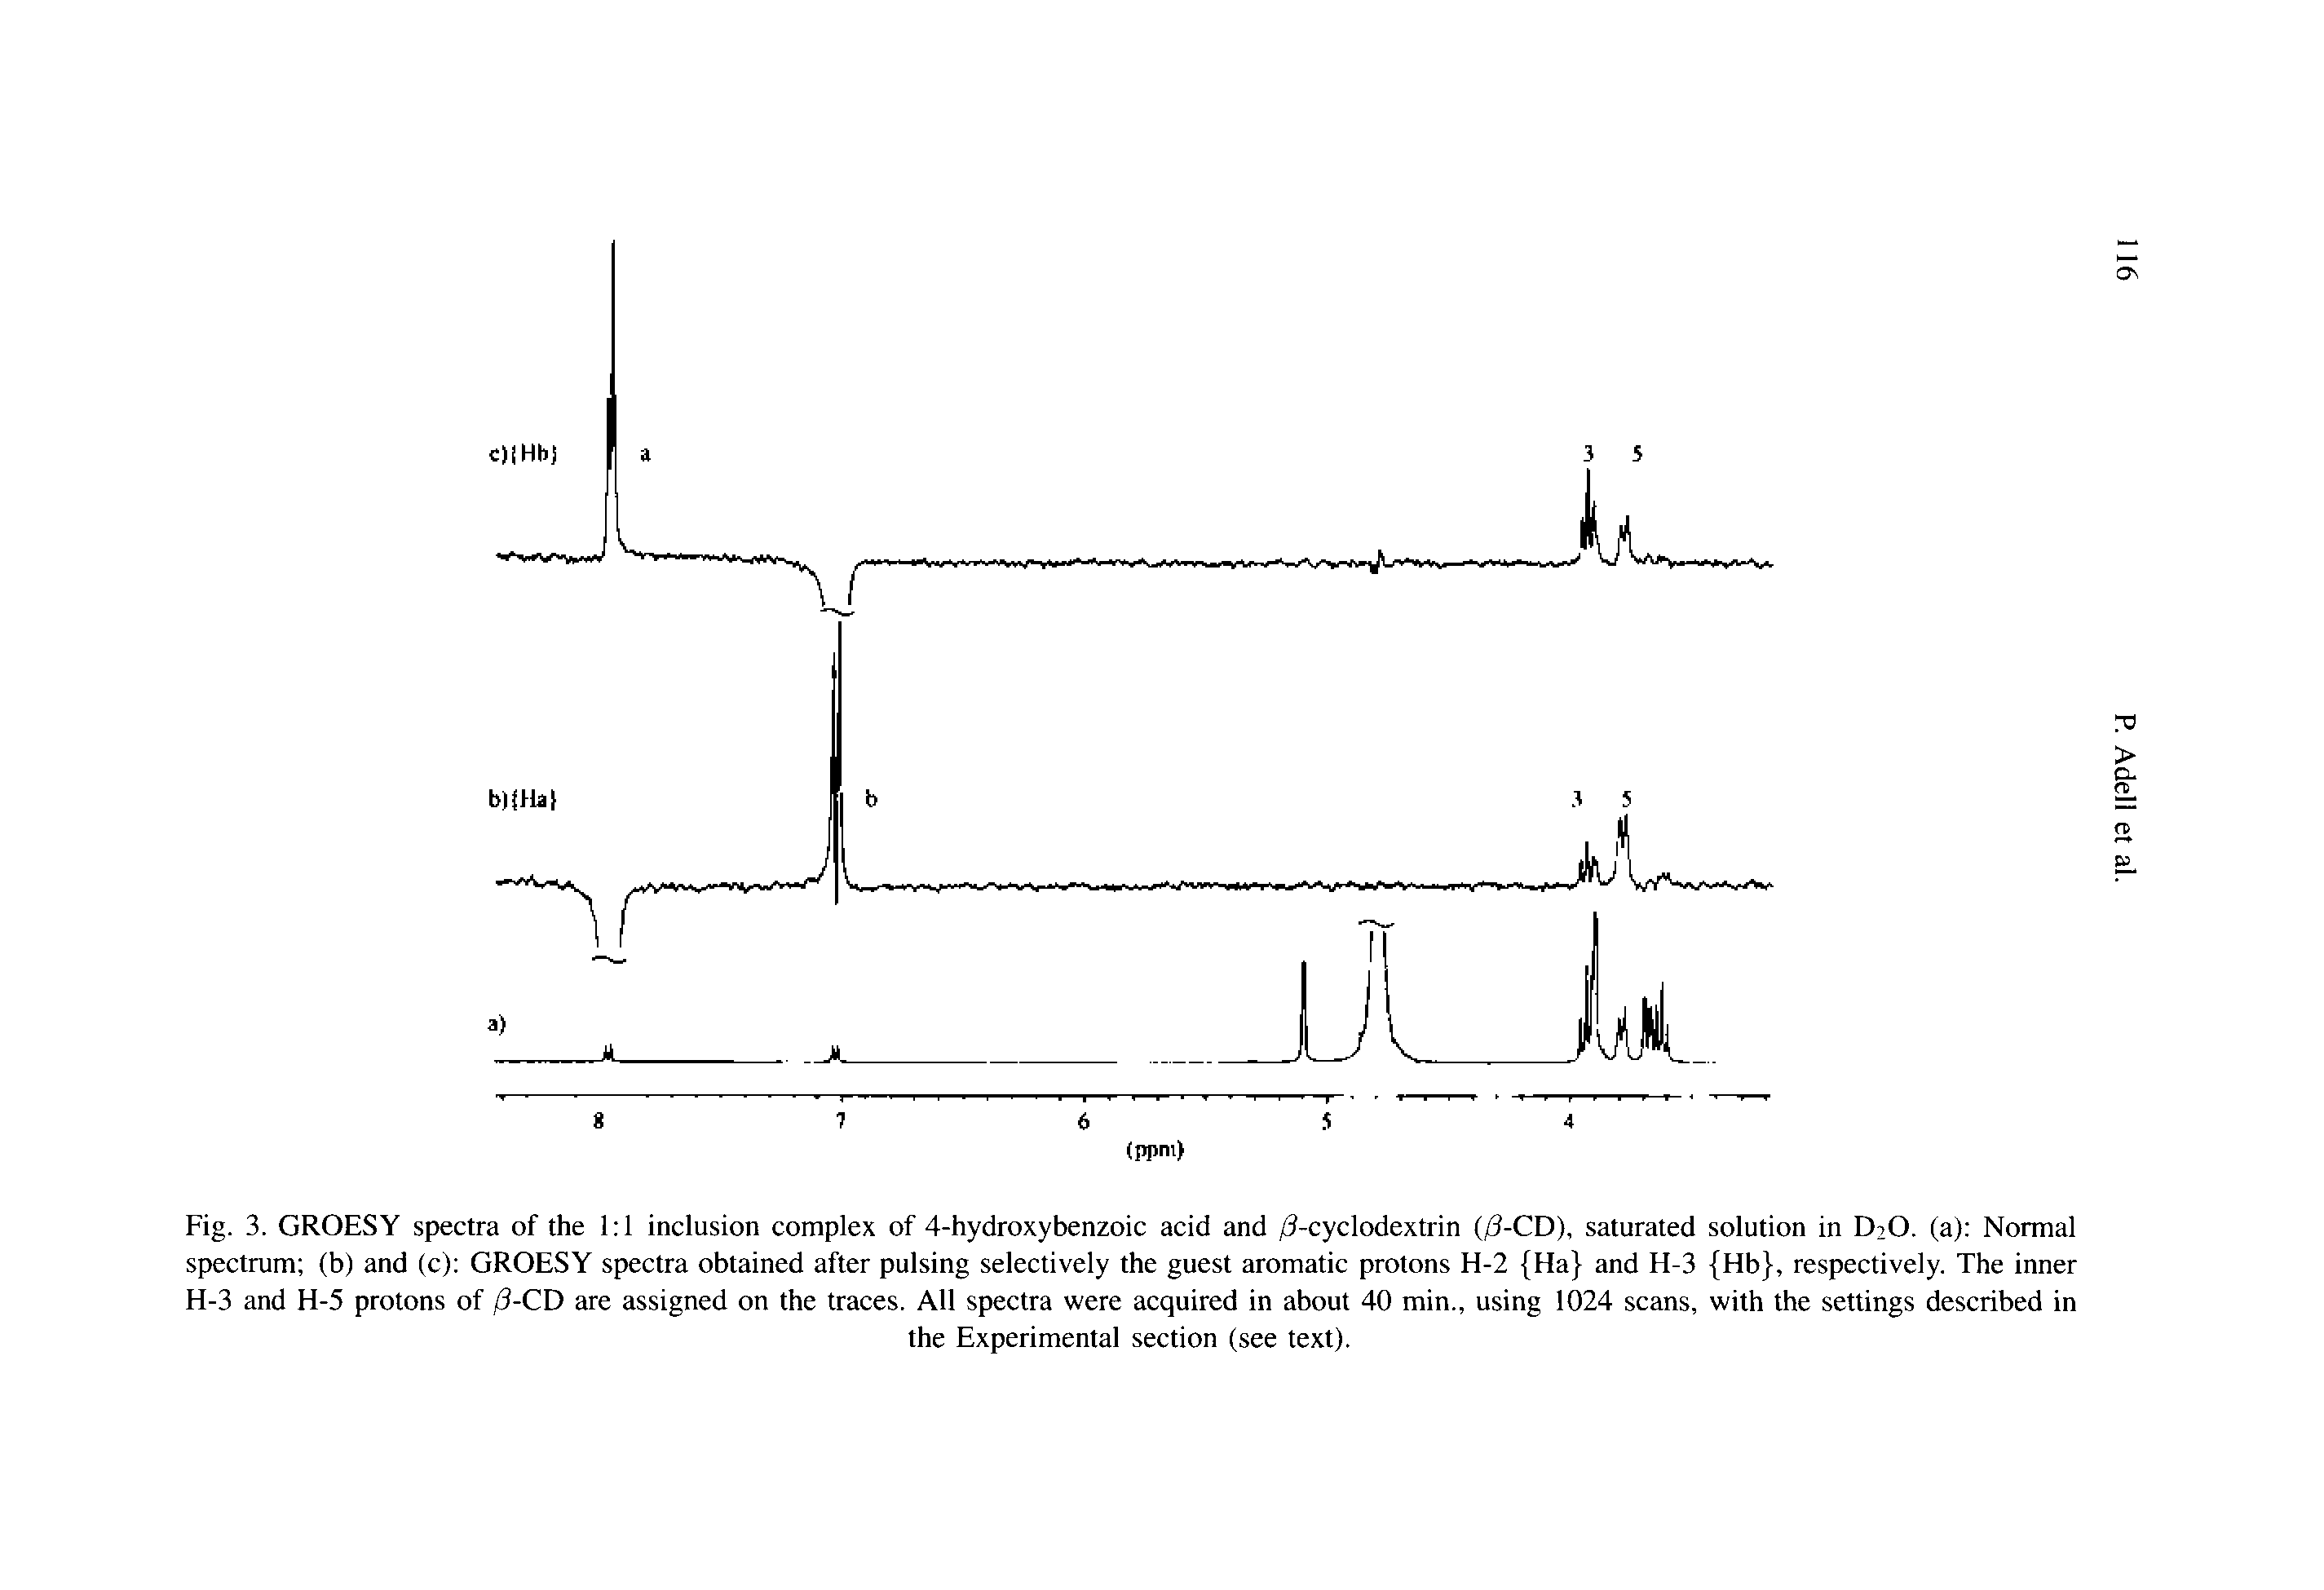 Fig. 3. GROESY spectra of the 1 1 inclusion complex of 4-hydroxybenzoic acid and /3-cyclodextrin (/3-CD), saturated solution in D2O. (a) Normal spectrum (b) and (c) GROESY spectra obtained after pulsing selectively the guest aromatic protons H-2 Ha and H-3 (Hb), respectively. The inner H-3 and H-5 protons of /3-CD are assigned on the traces. All spectra were acquired in about 40 min., using 1024 scans, with the settings described in...